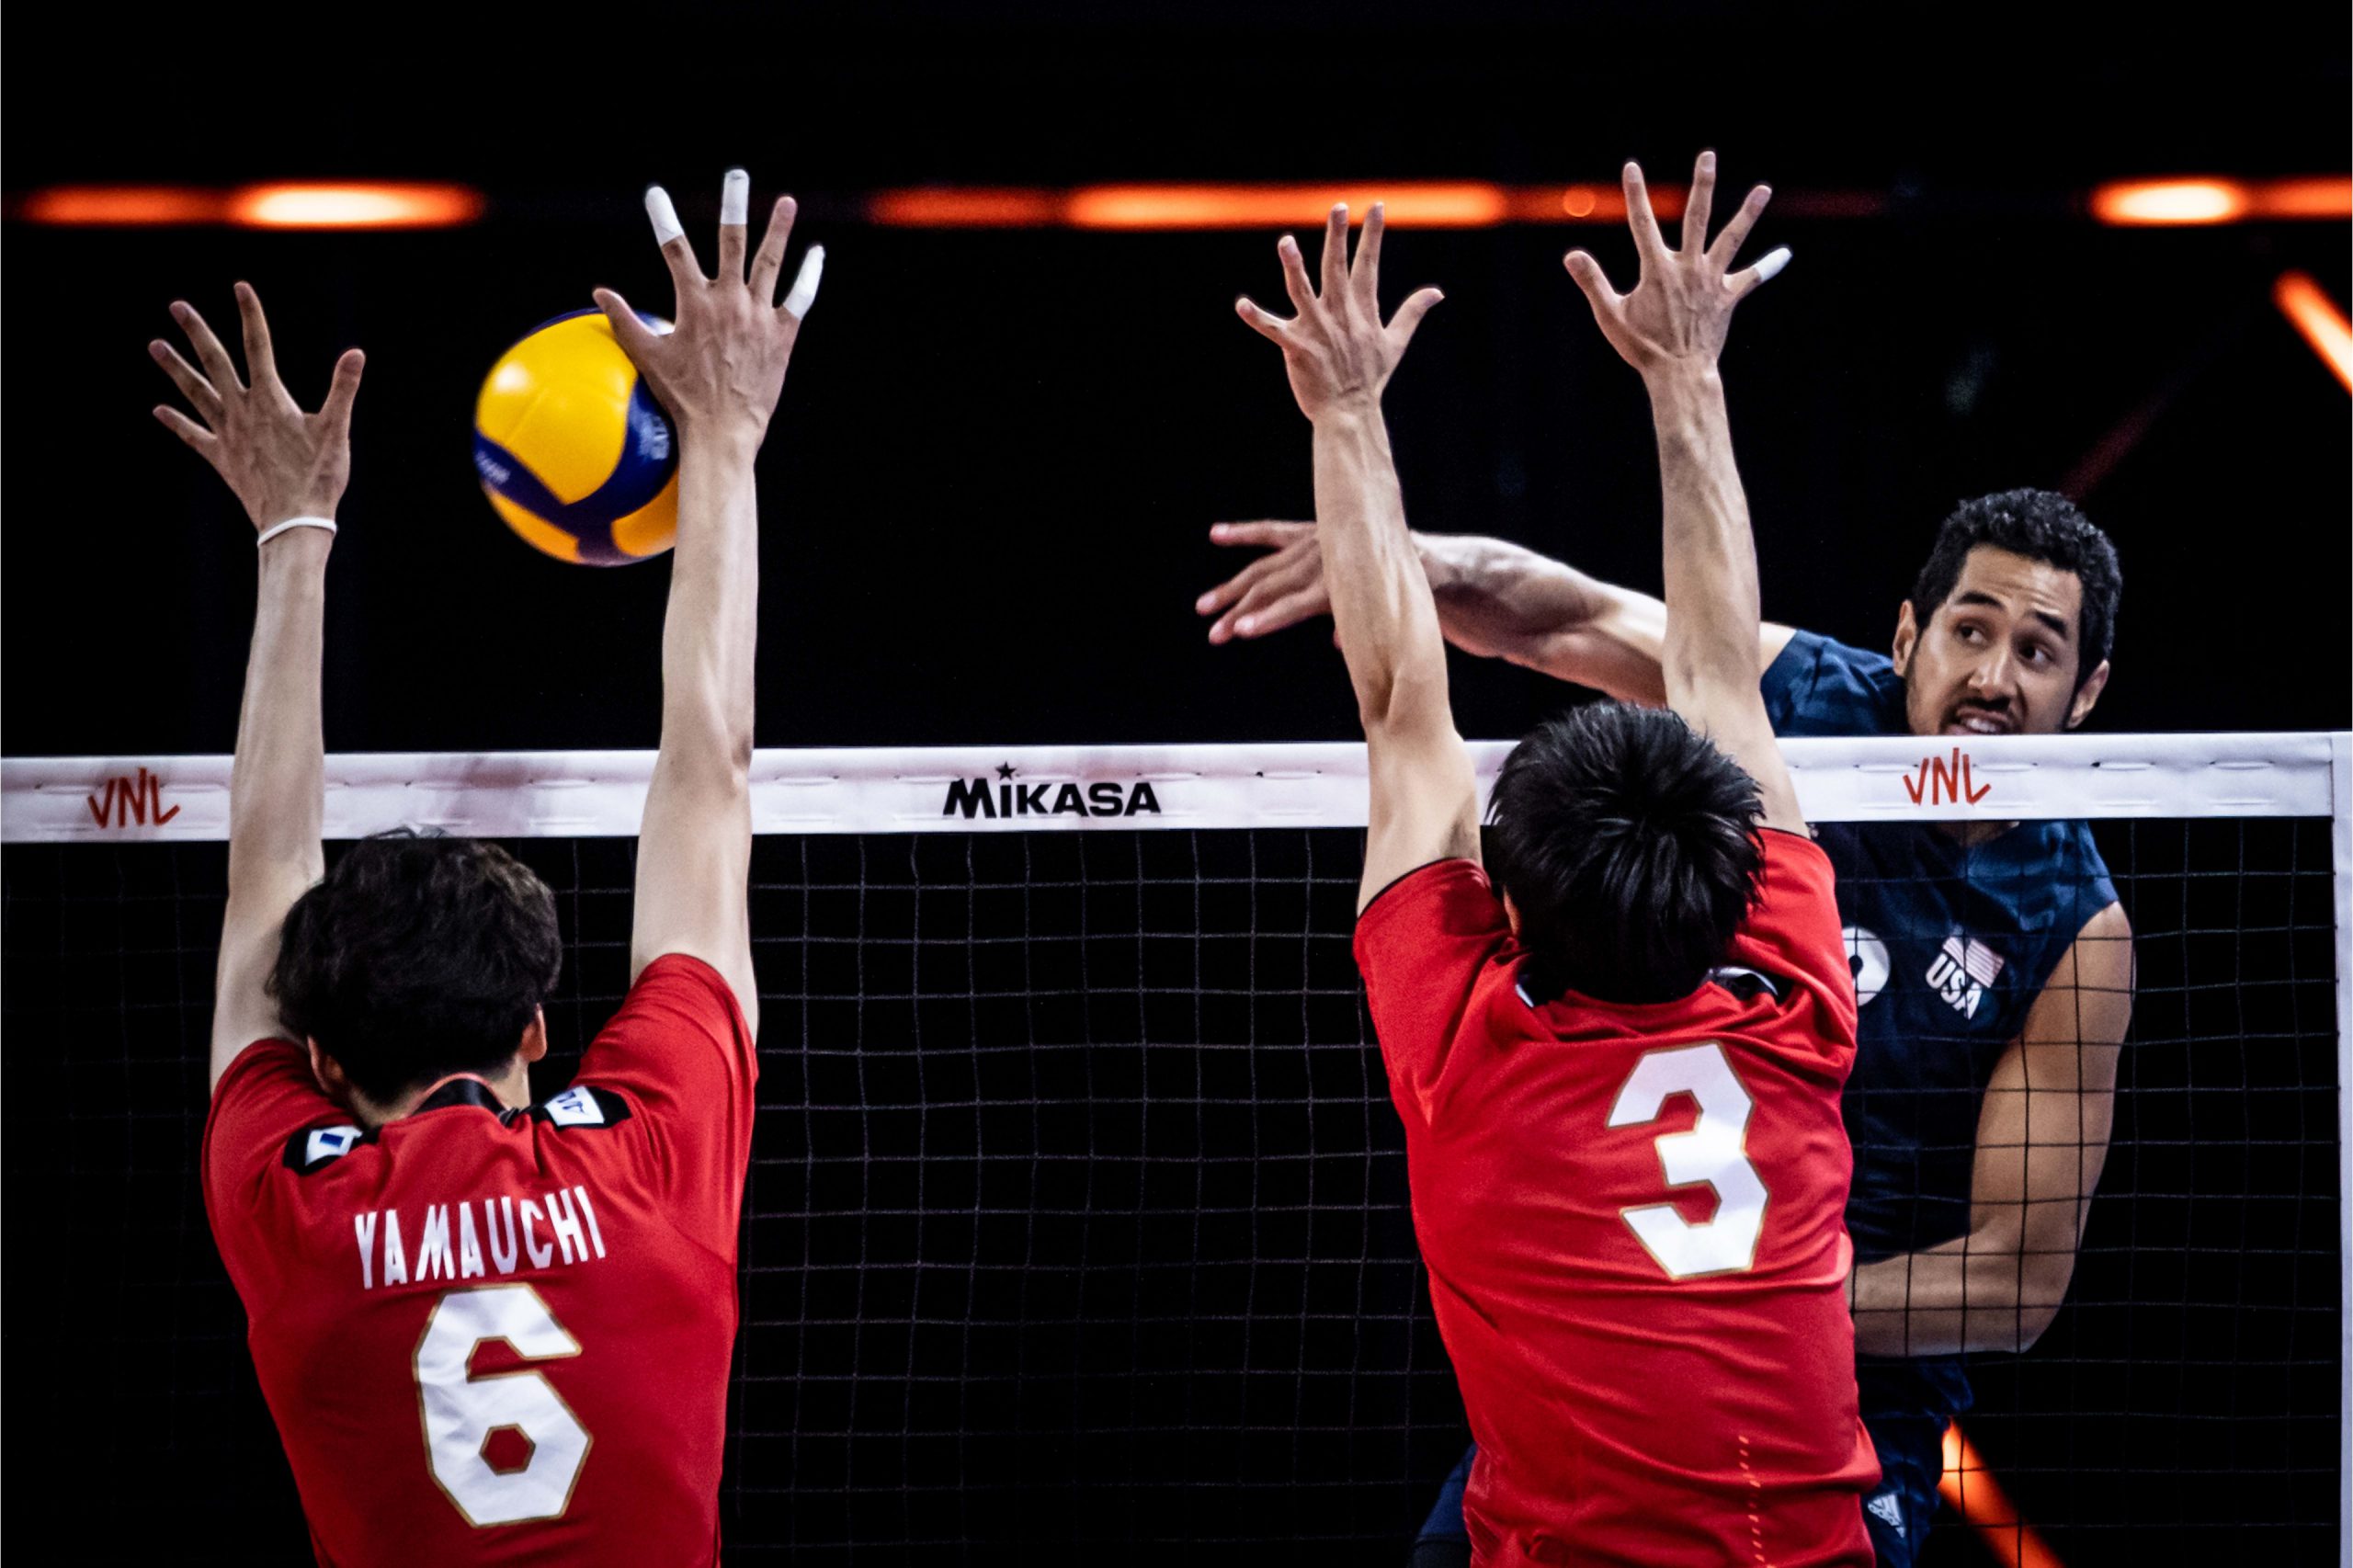 JAPAN SUFFER DEFEAT AGAINST USA IN THEIR LAST VNL MATCH Asian